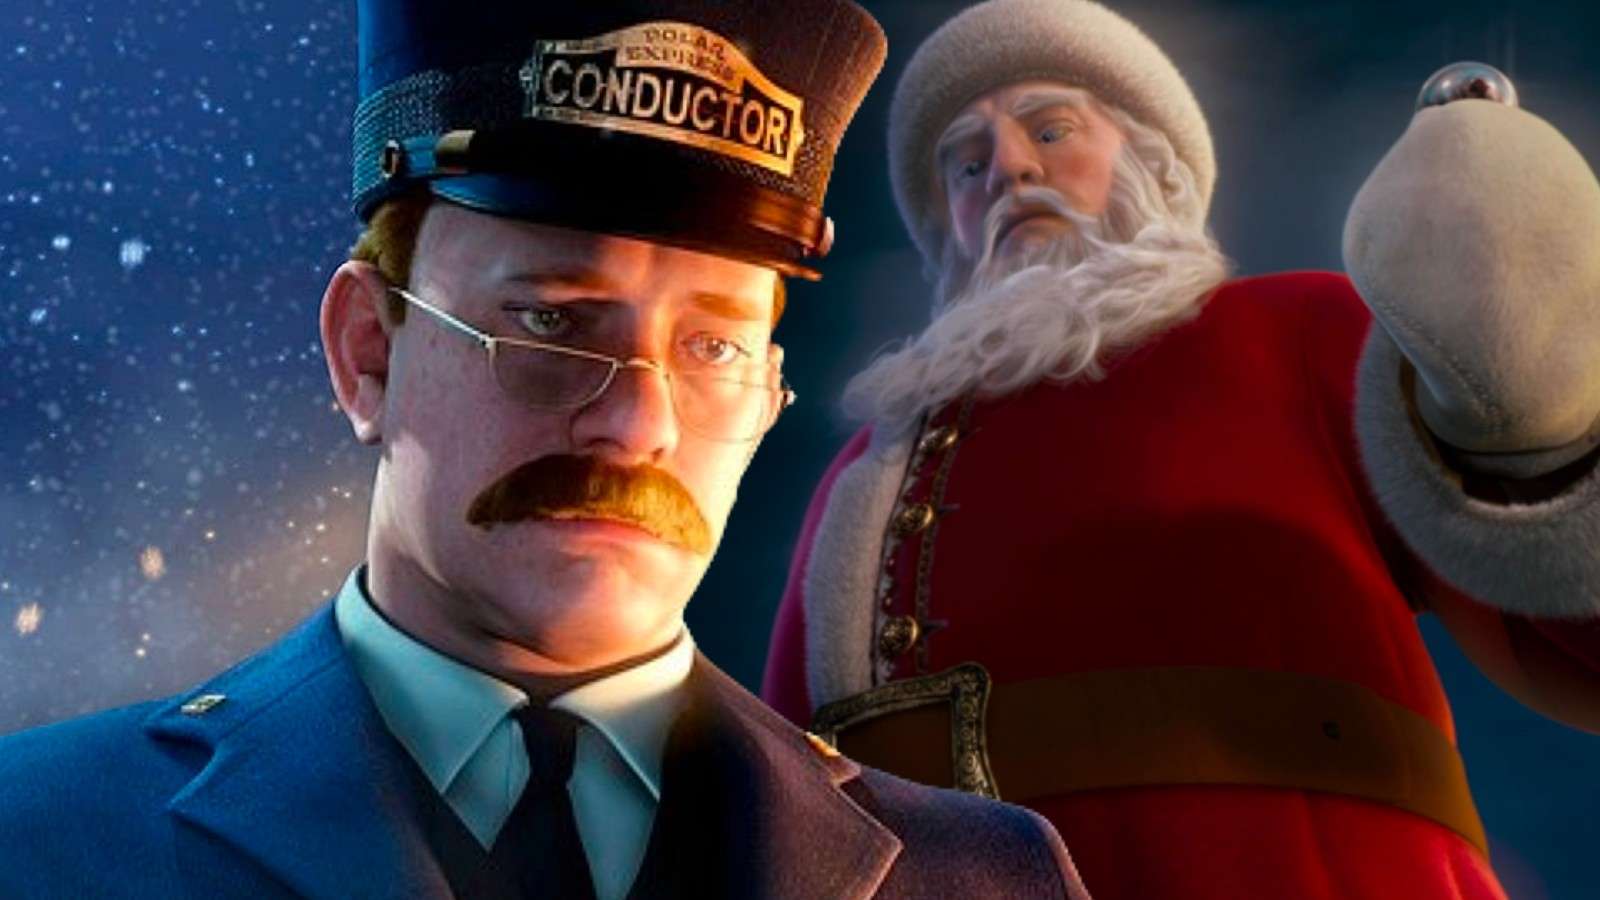 Tom Hanks in The Polar Express as the Conductor and Santa